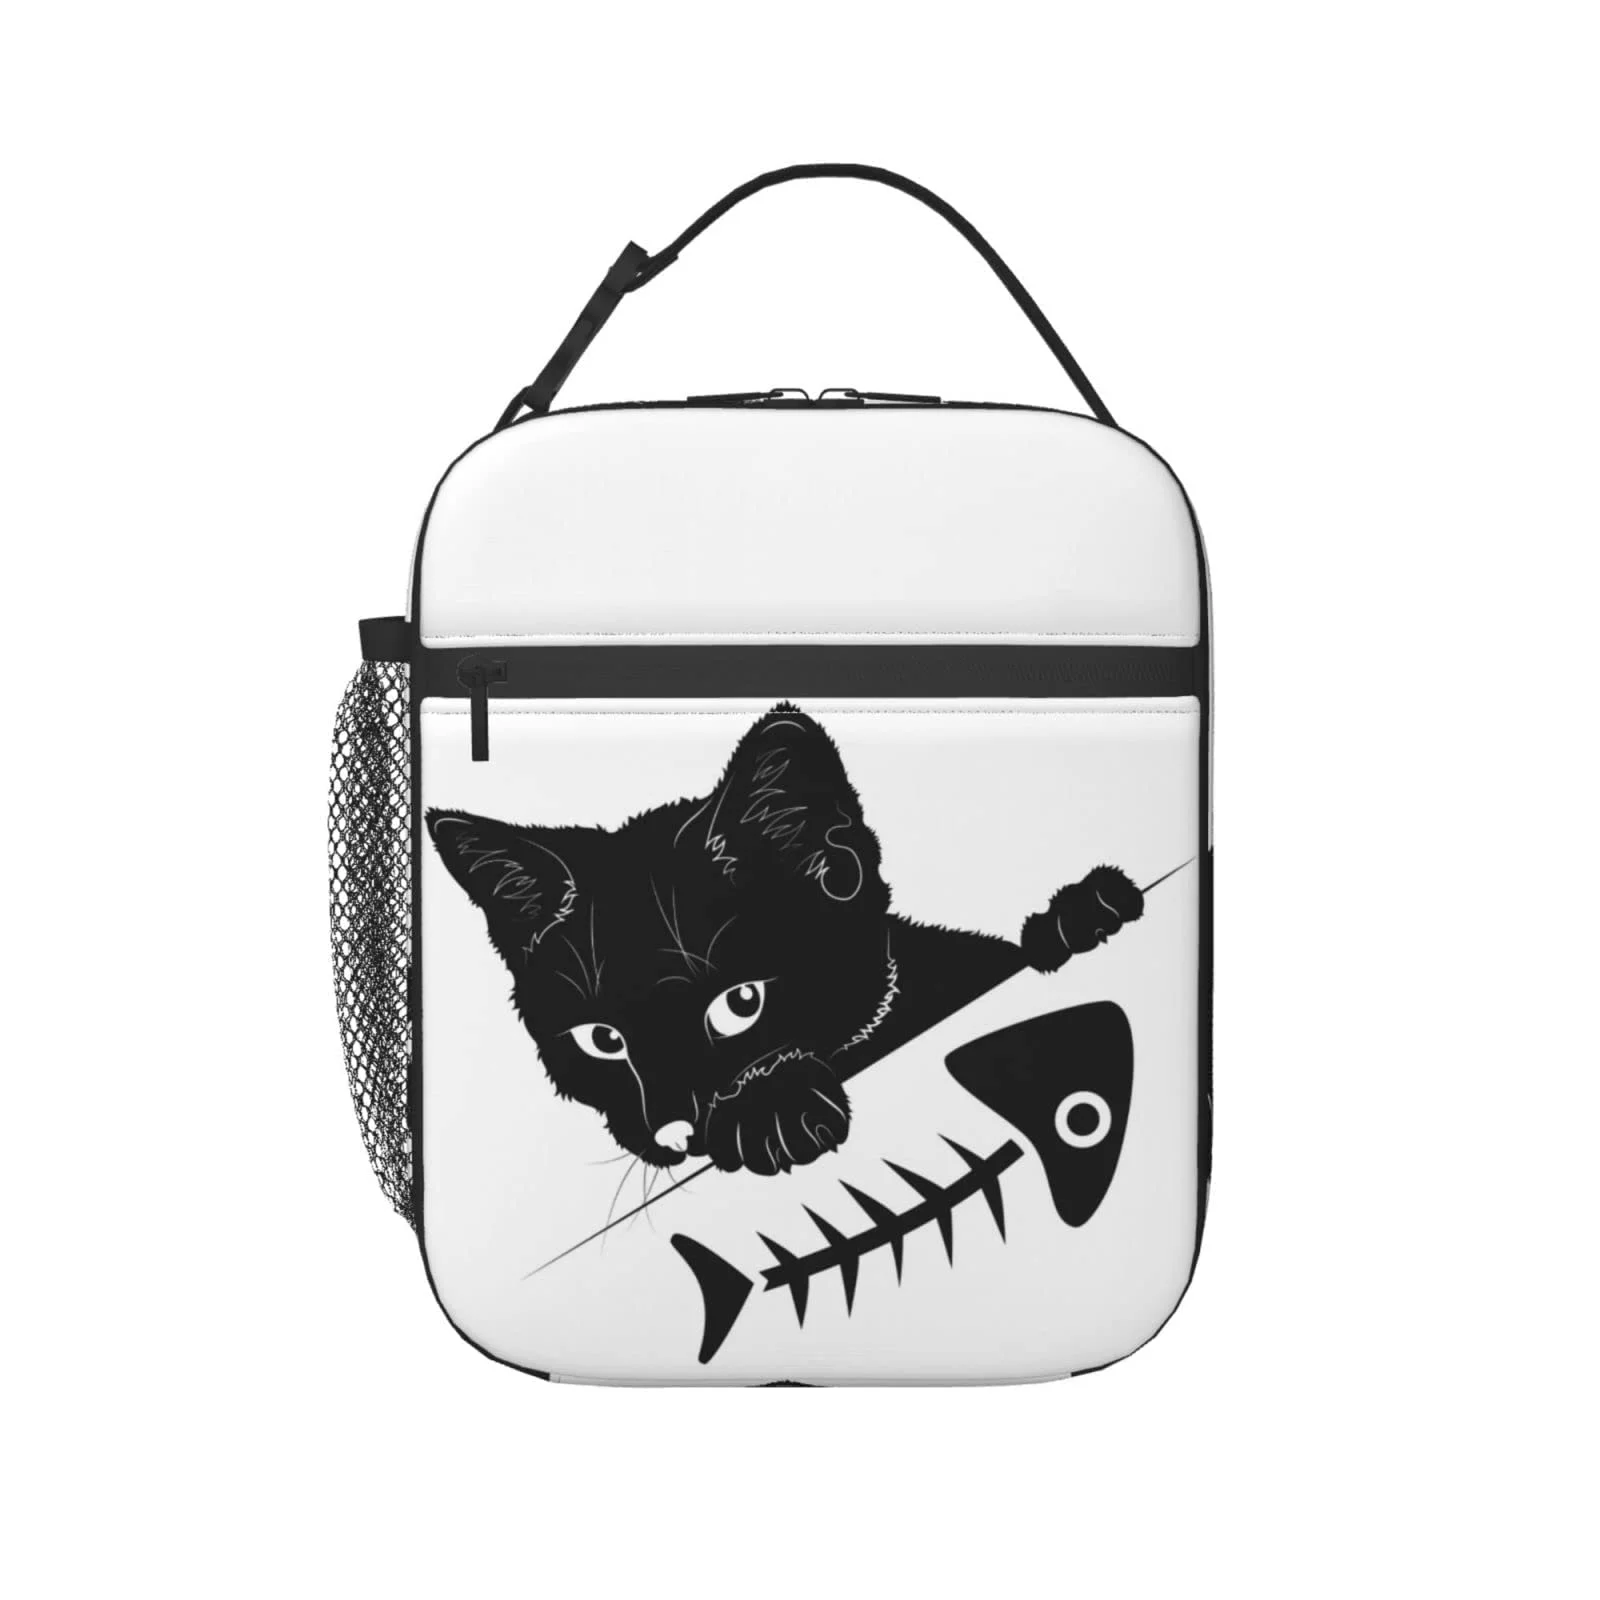 

Thermal Lunch Box kids Children's School Food Travel Thermobox Beach Portable Men Women Teenager Work Office Cute Cat